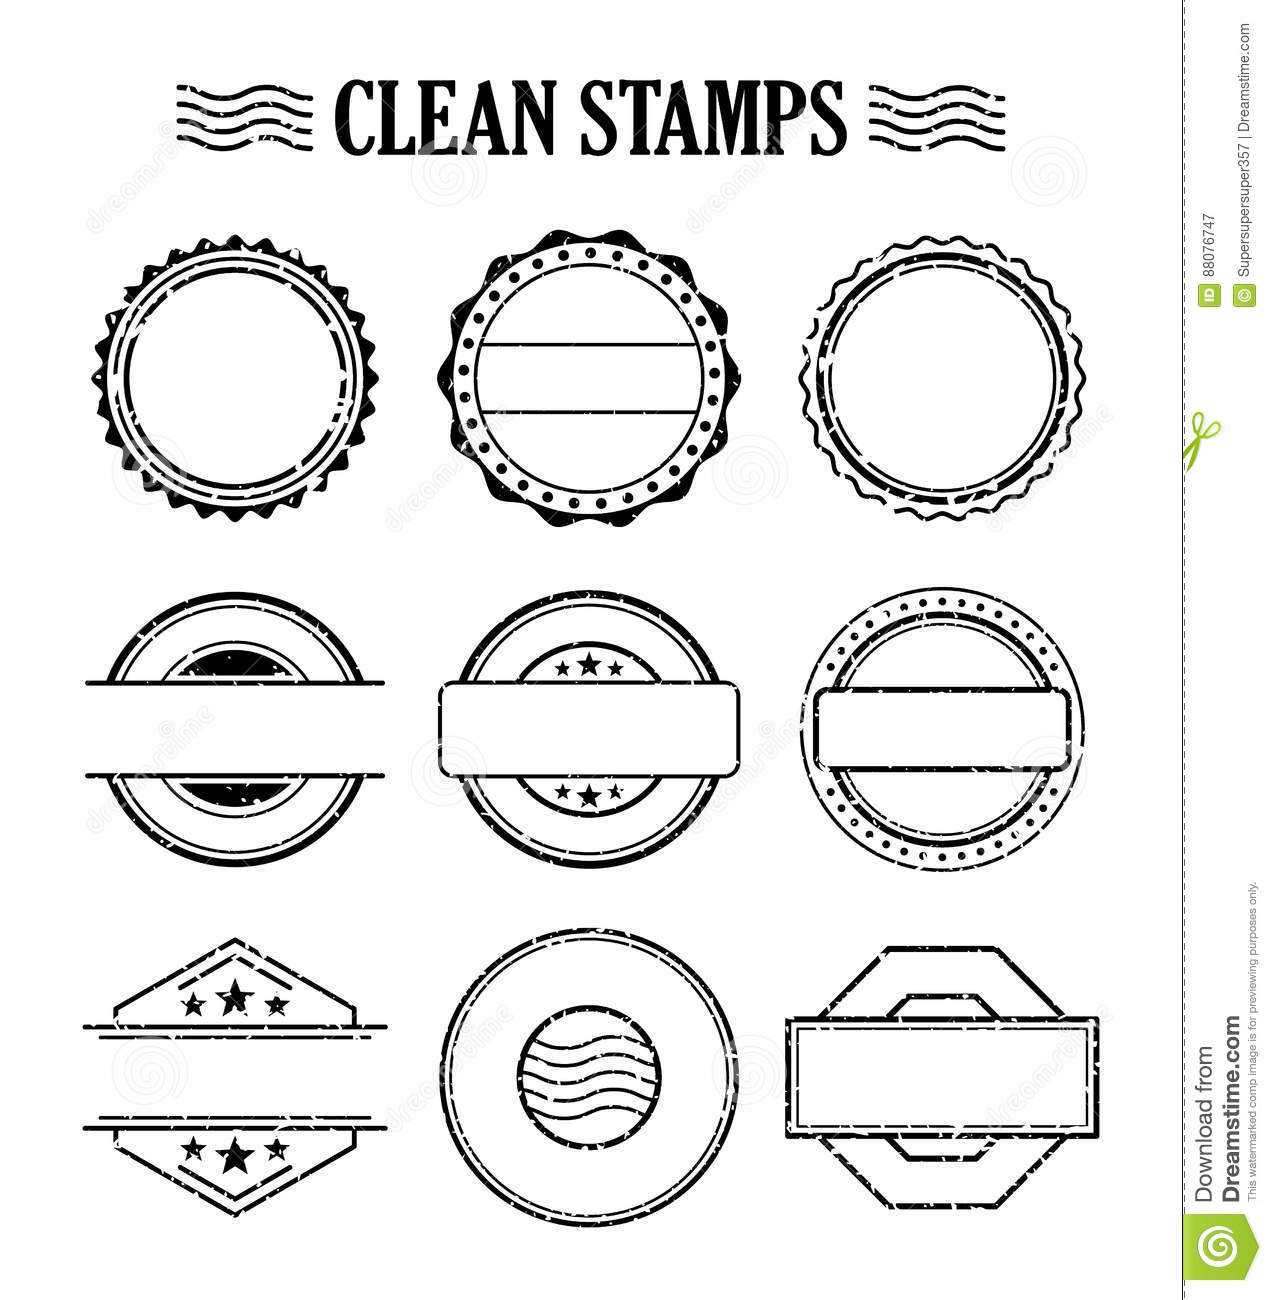 Blank Stamp Set, Ink Rubber Seal Texture Effect Stock Vector With Blank Seal Template